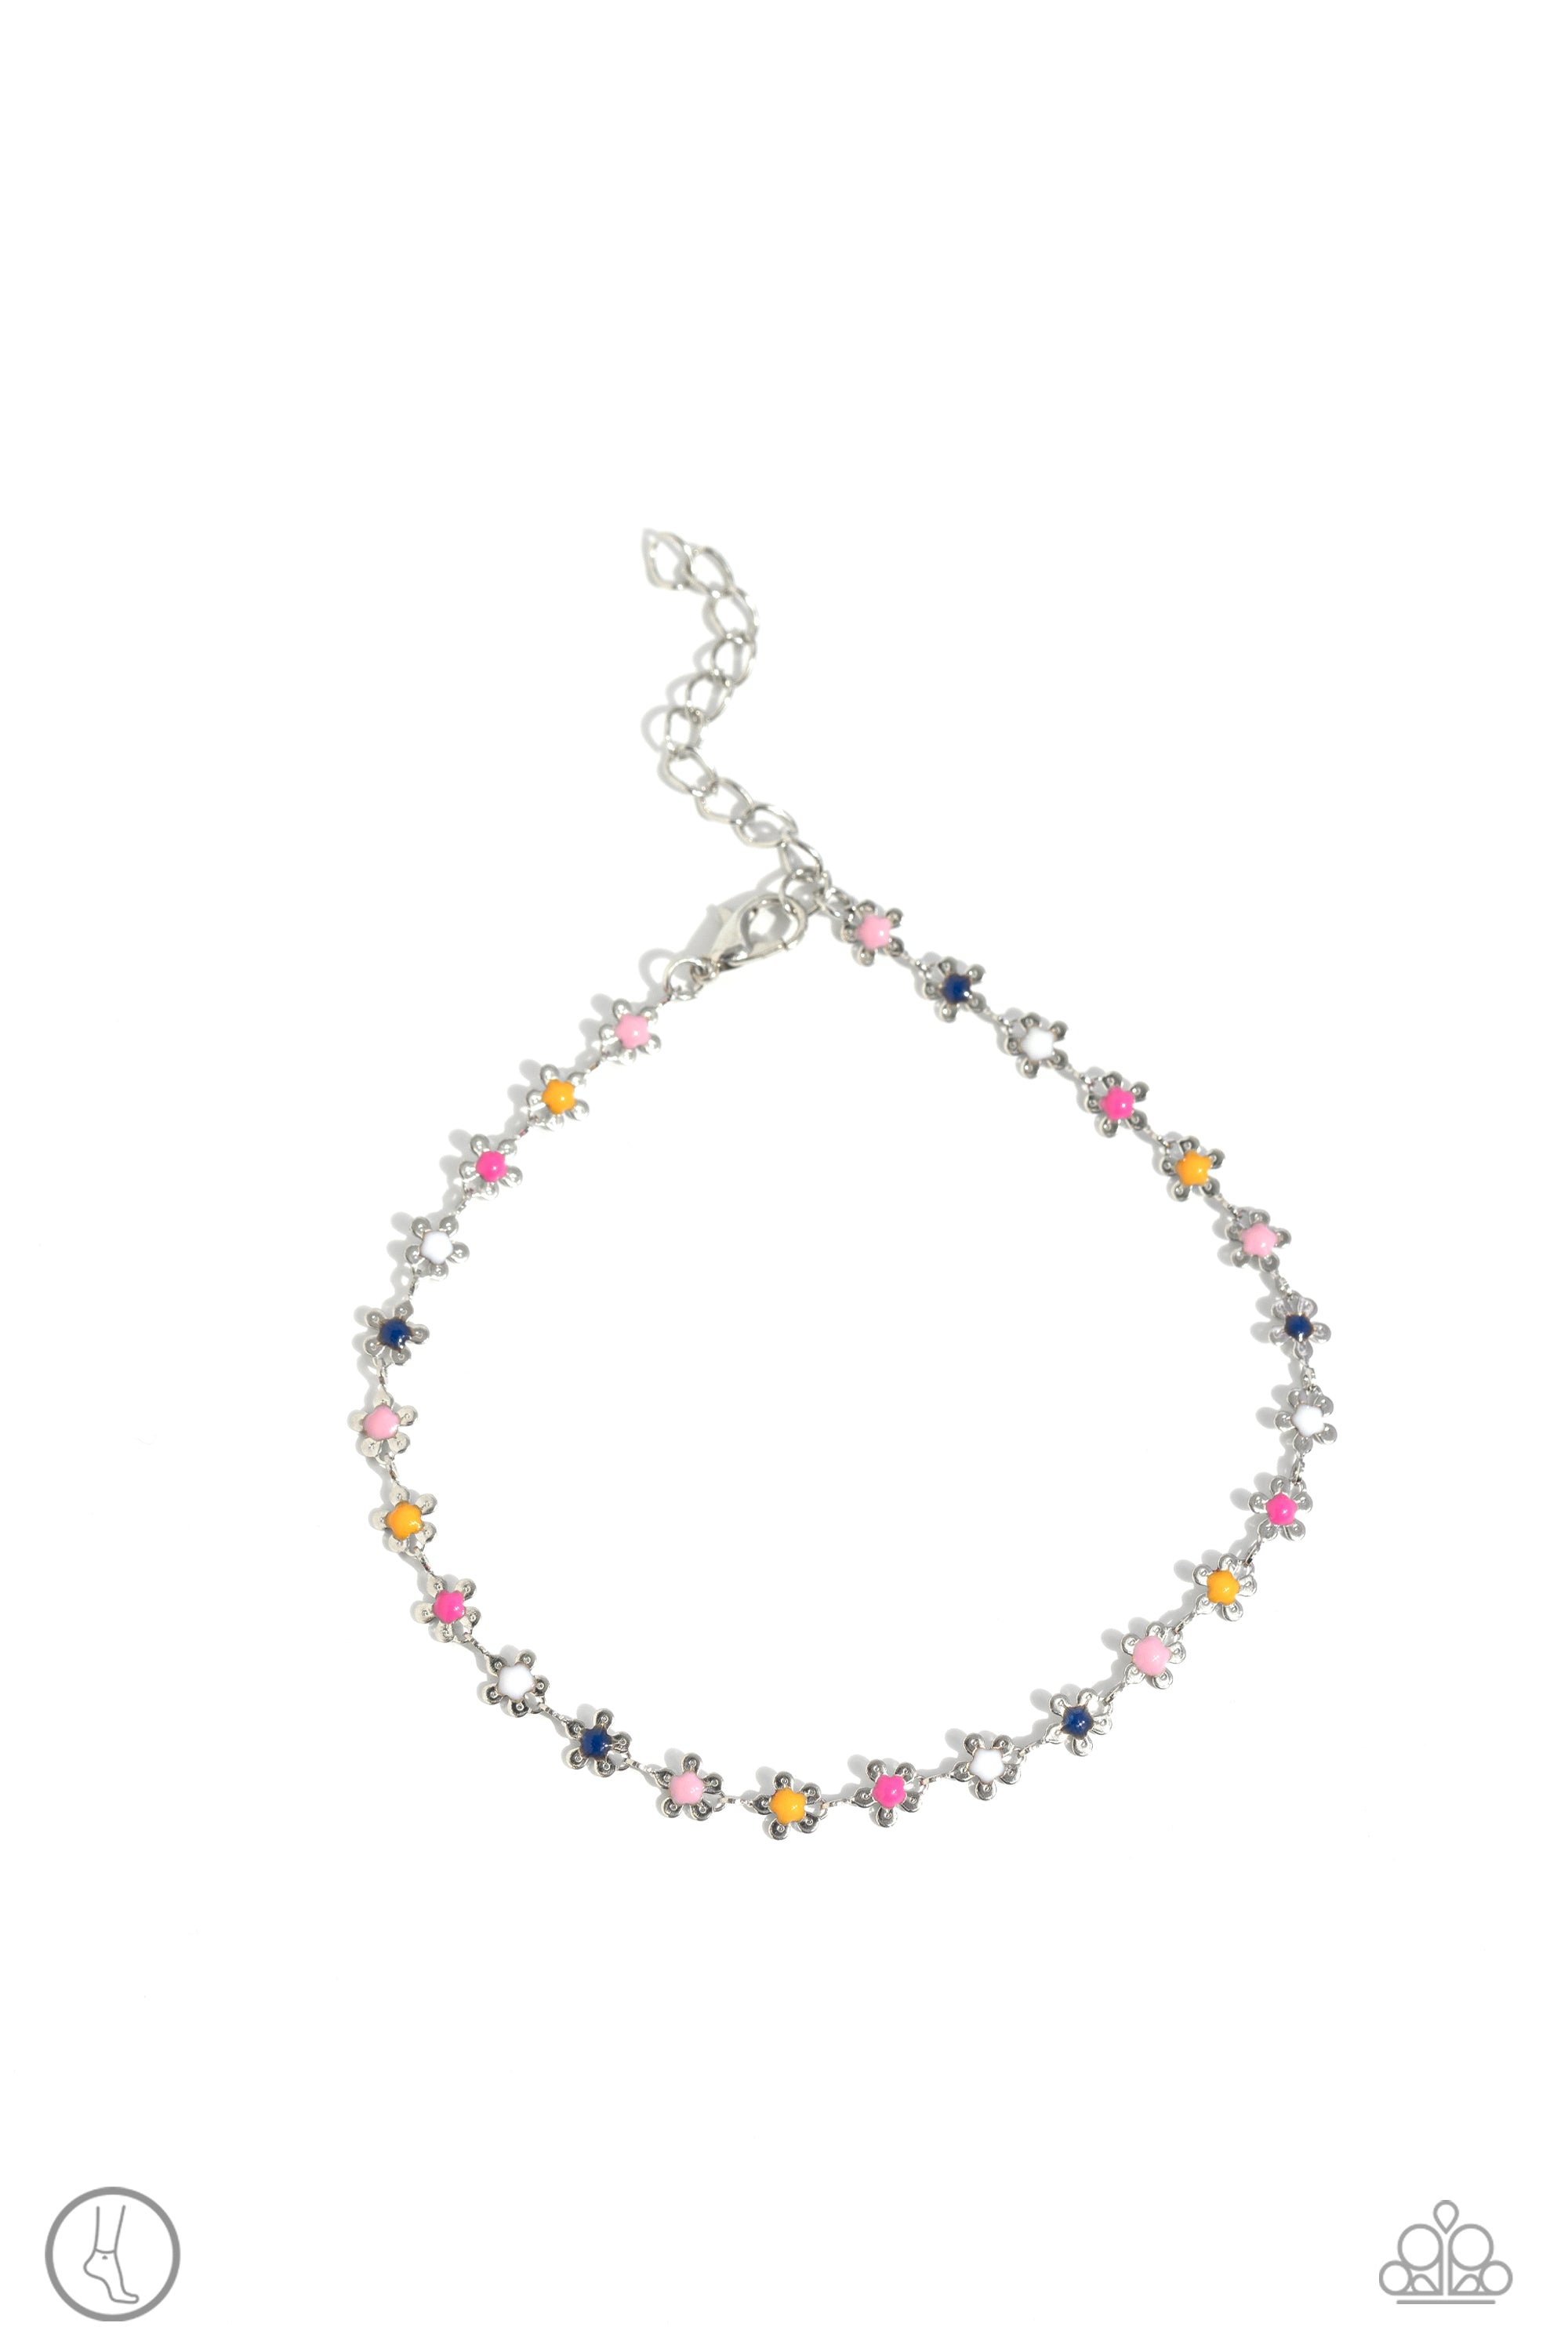 Familiar Florals Multi Flower Anklet - Paparazzi Accessories- lightbox - CarasShop.com - $5 Jewelry by Cara Jewels